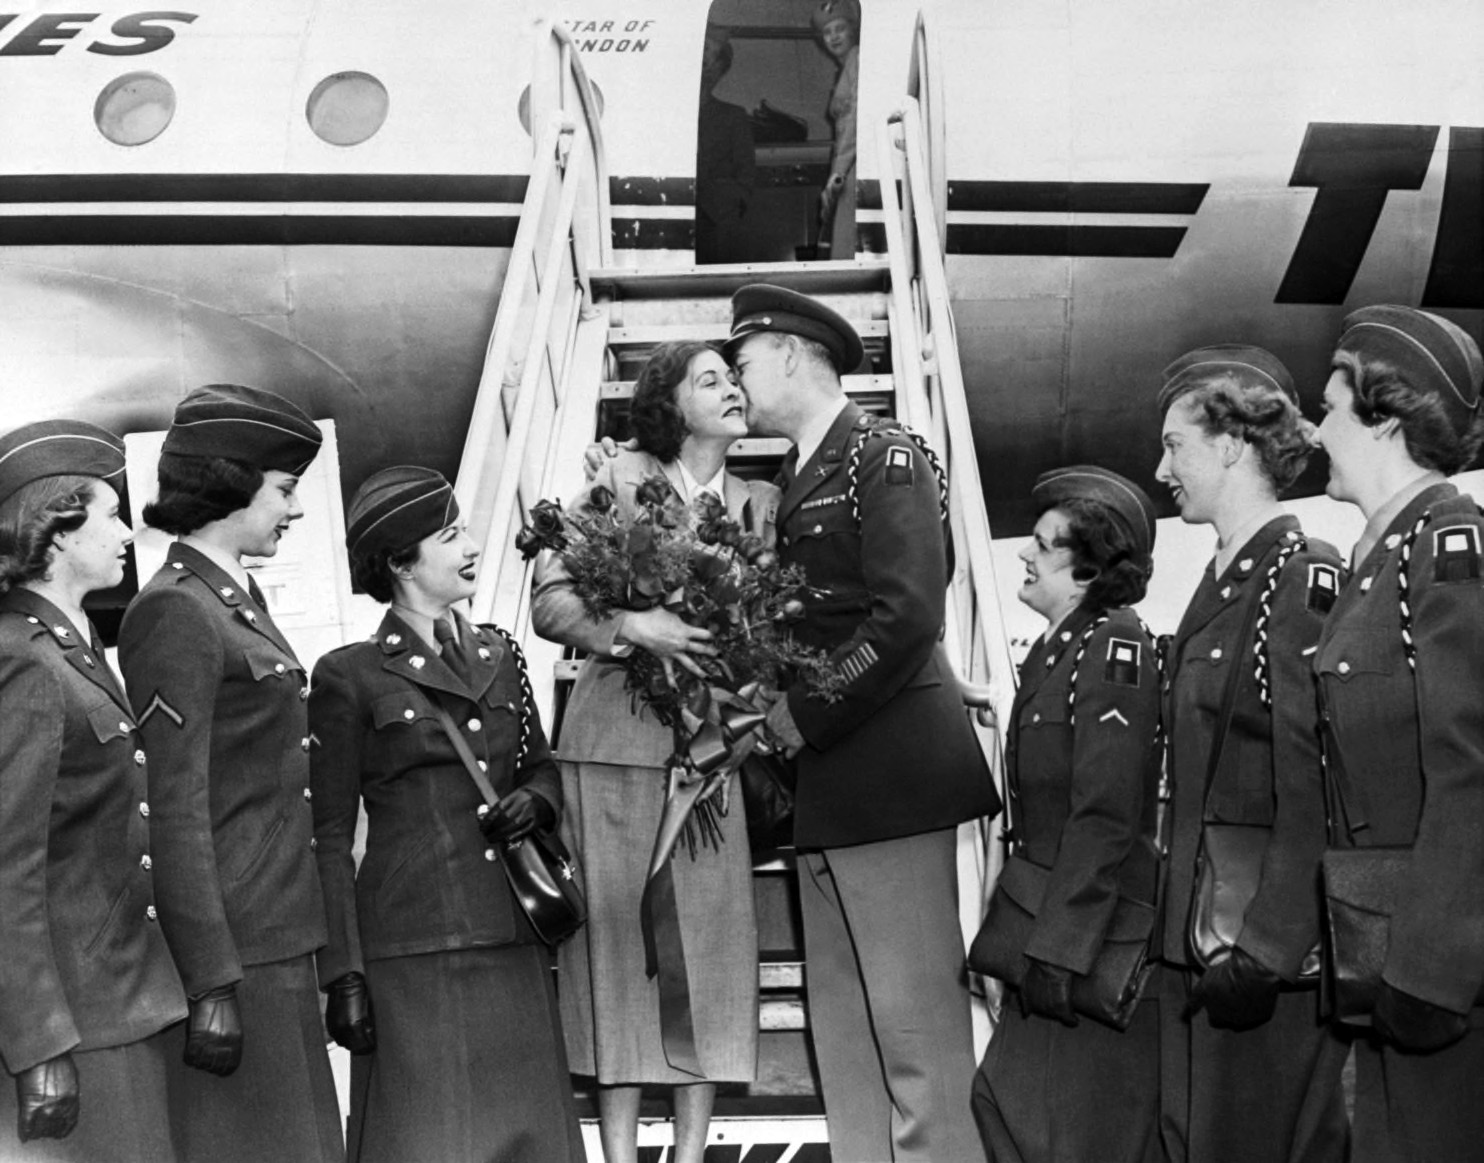 Phillips receives a bouquet of flowers and a warm greeting from Major Kenneth Boggs, who survived Japanese imprisonment with her help.